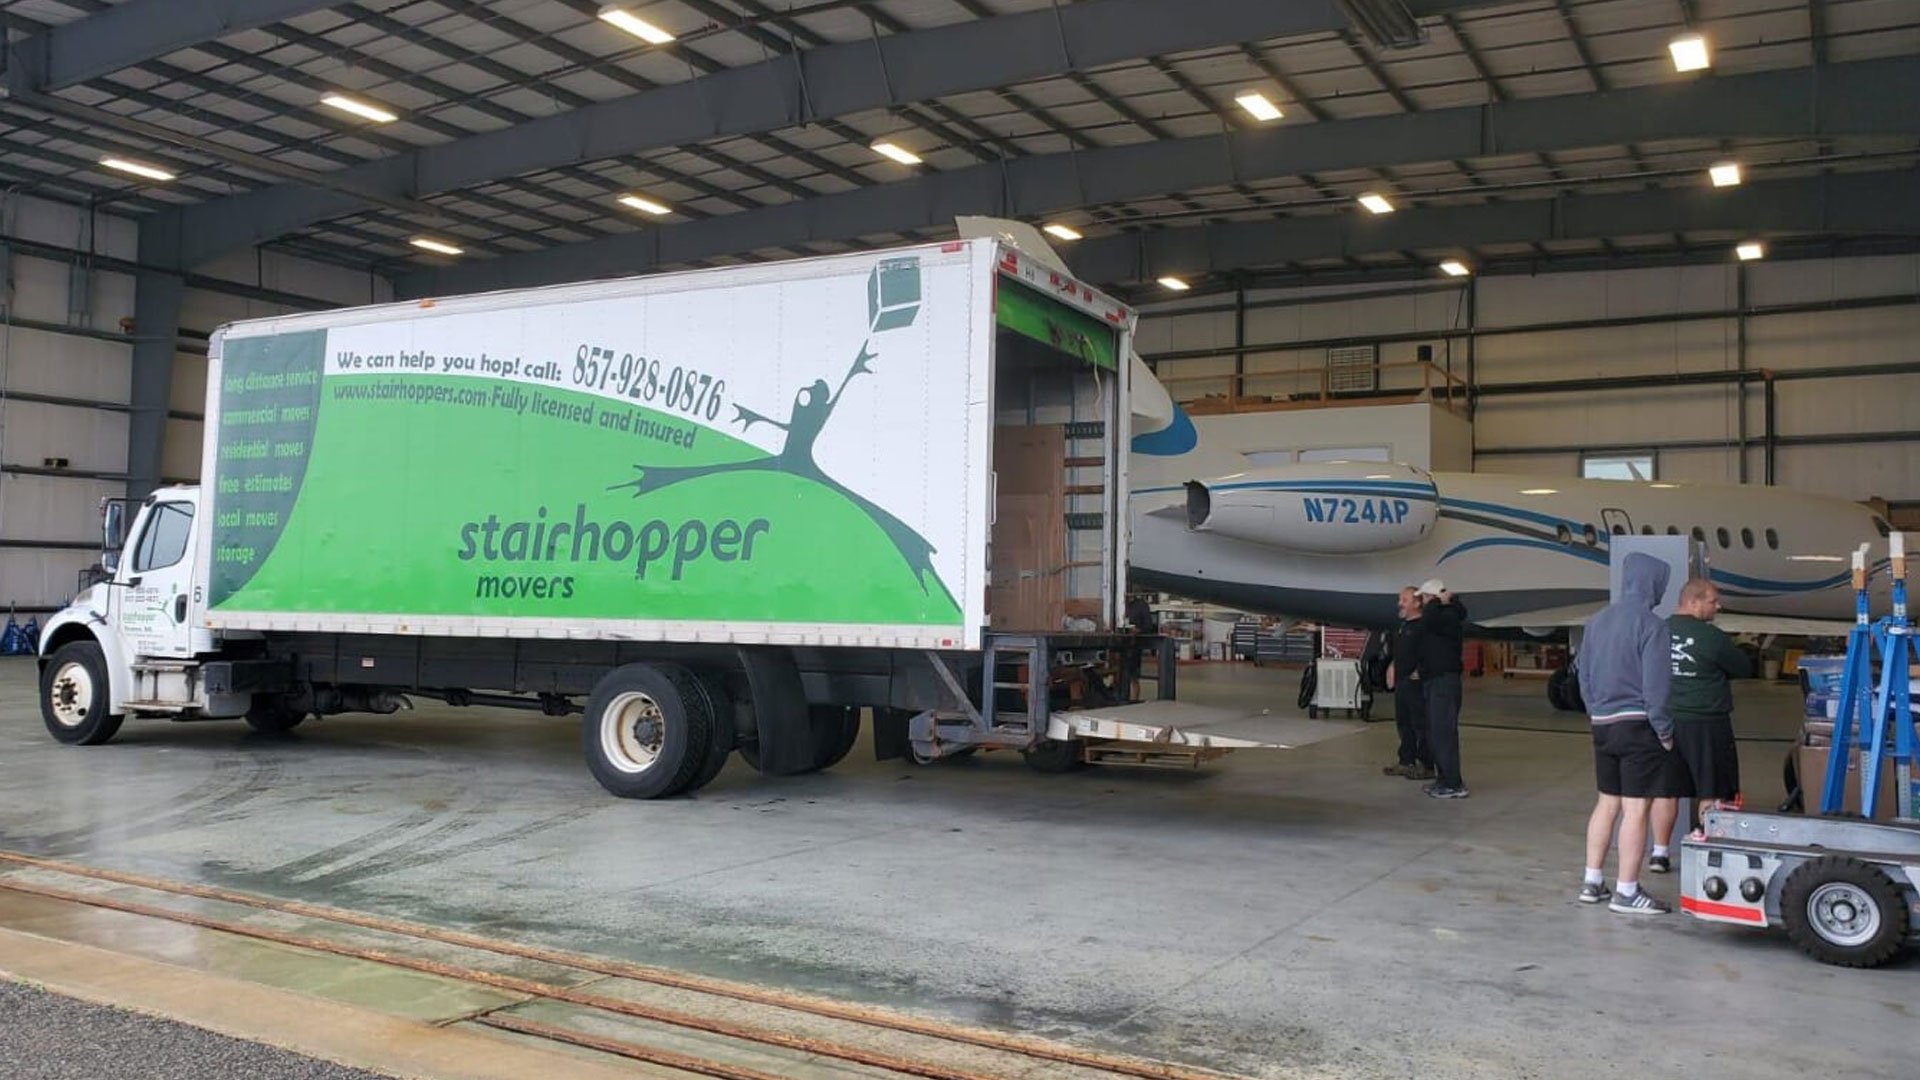 Commercial Moves and Moving Company Boston | Stairhopper Movers Boston